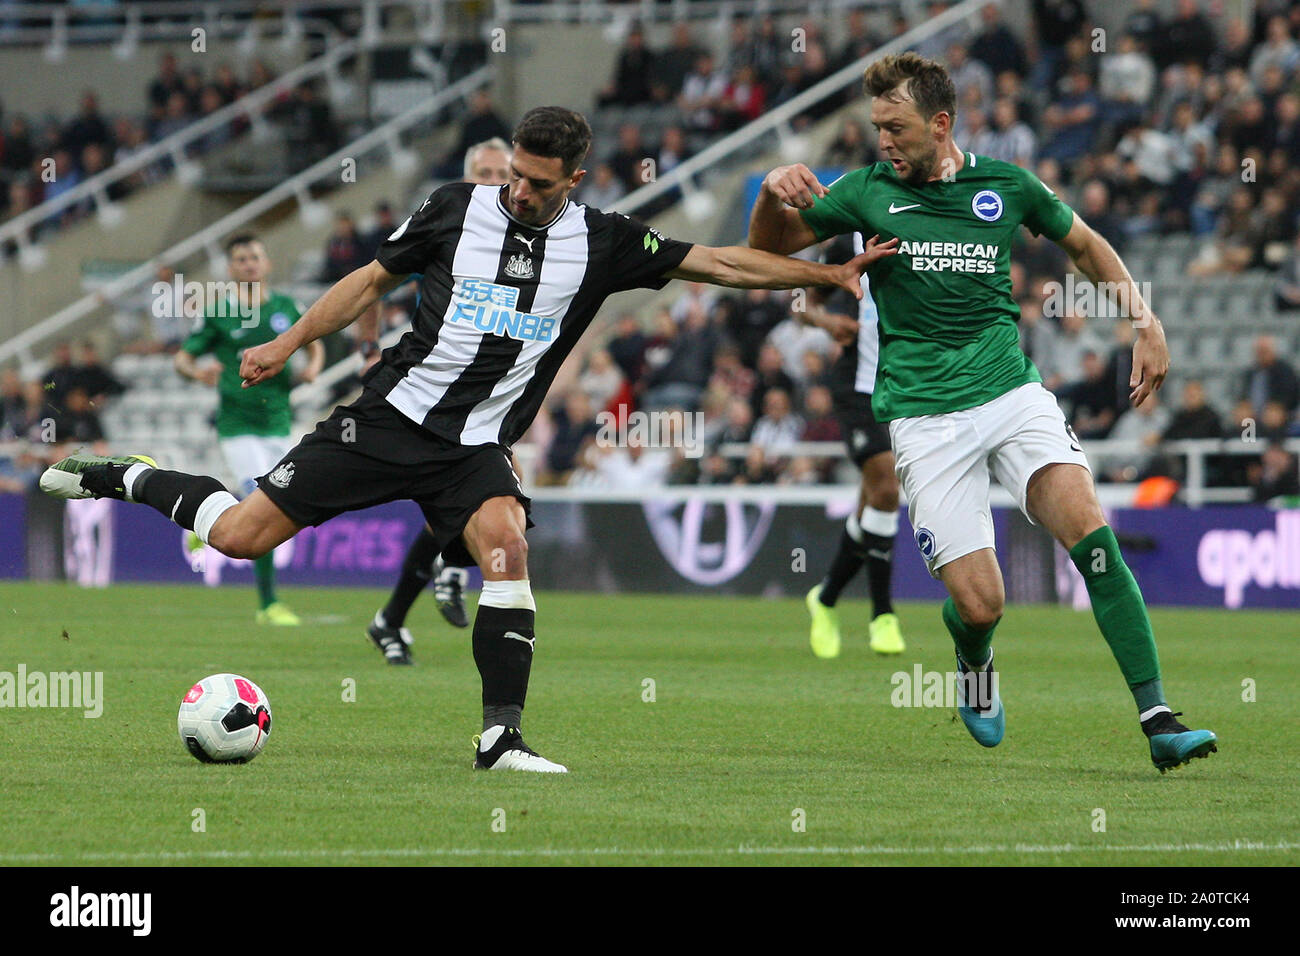 Newcastle, UK. 21st Sep, 2019.  Newcastle United's Fabian Schar competes for the ball with Brighton & Hove Albion's Dale Stephens during the Premier League match between Newcastle United and Brighton and Hove Albion at St. James's Park, Newcastle on Saturday 21st September 2019. (Credit: Steven Hadlow | MI News) Photograph may only be used for newspaper and/or magazine editorial purposes, license required for commercial use Credit: MI News & Sport /Alamy Live News Stock Photo